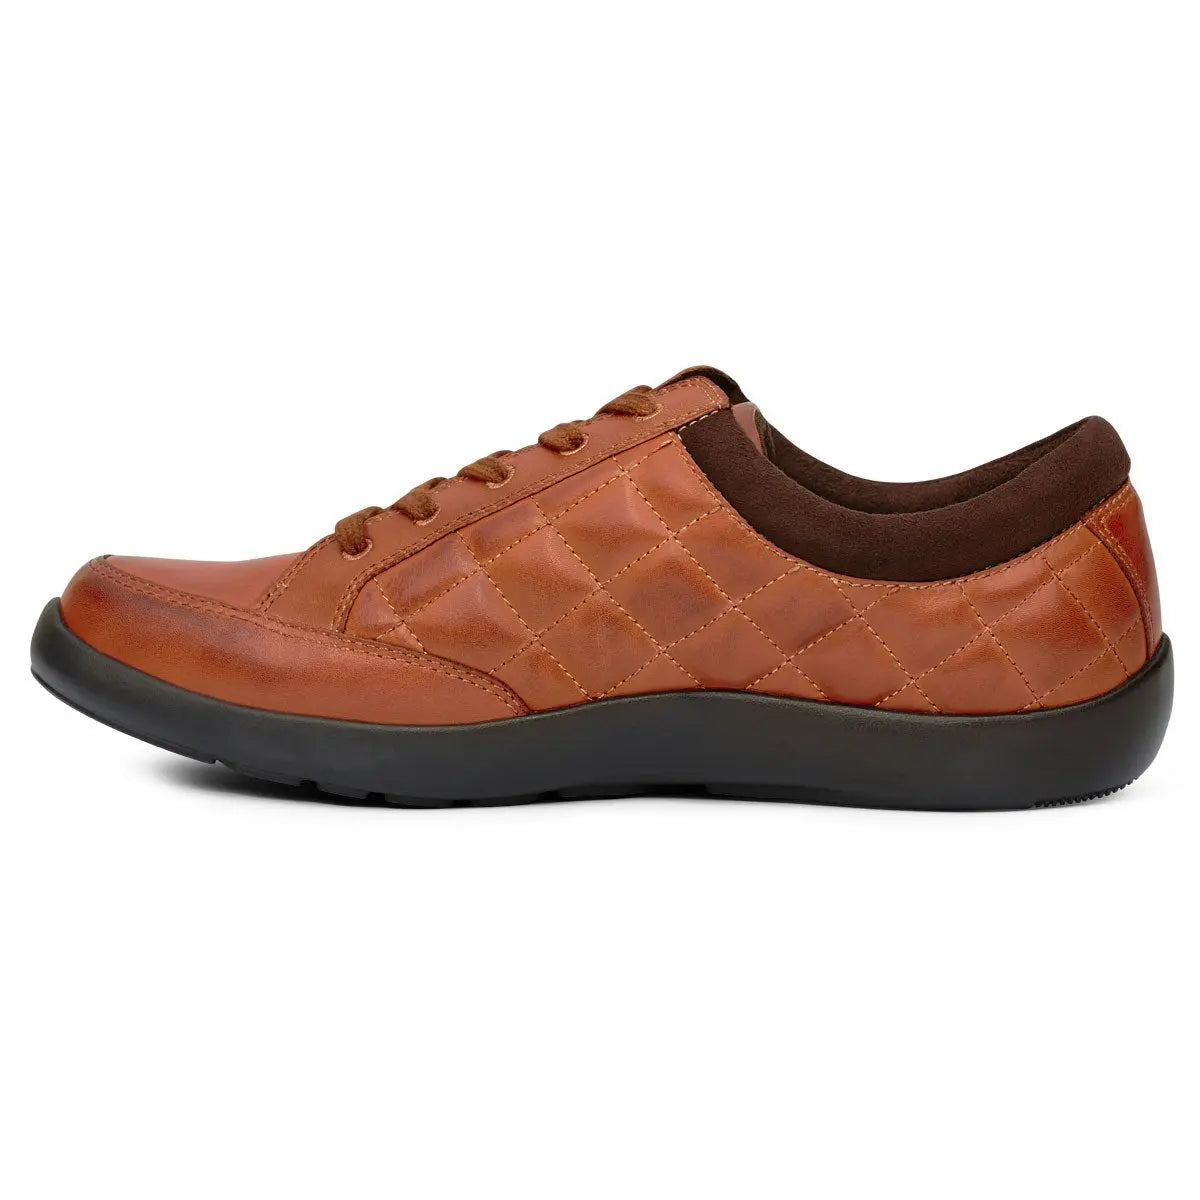 Anodyne No.75 Women's Therapeutic Diabetic Casual Sport Shoe, Saddle - side view | dahlmedicalsuppy.com